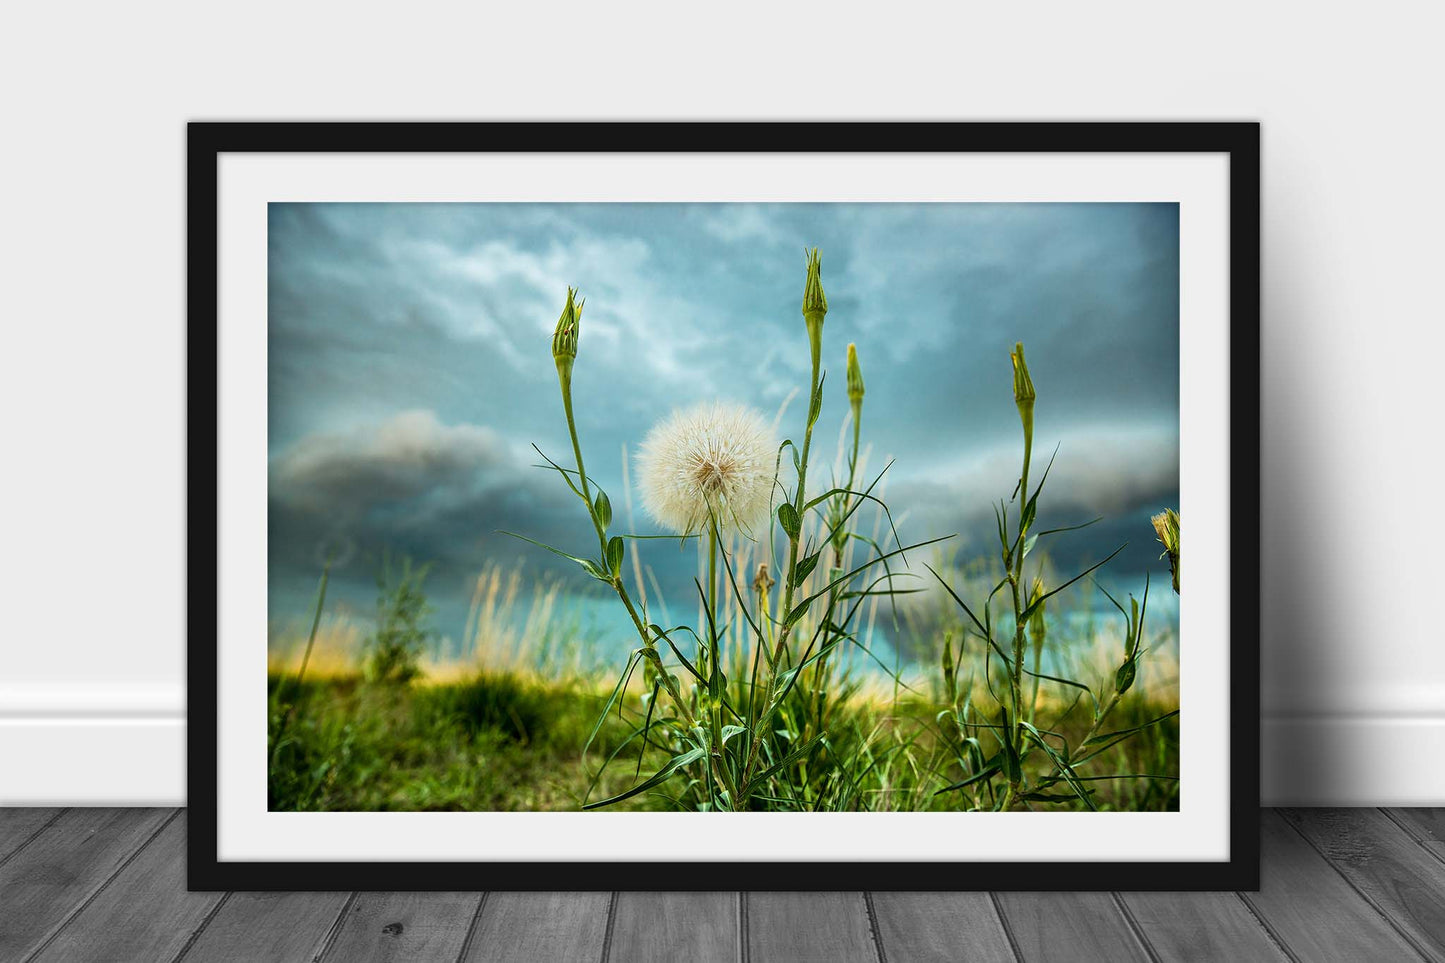 Framed and matted botanical print of a large dandelion as a storm approaches on a stormy spring day on the plains of Colorado by Sean Ramsey of Southern Plains Photography.